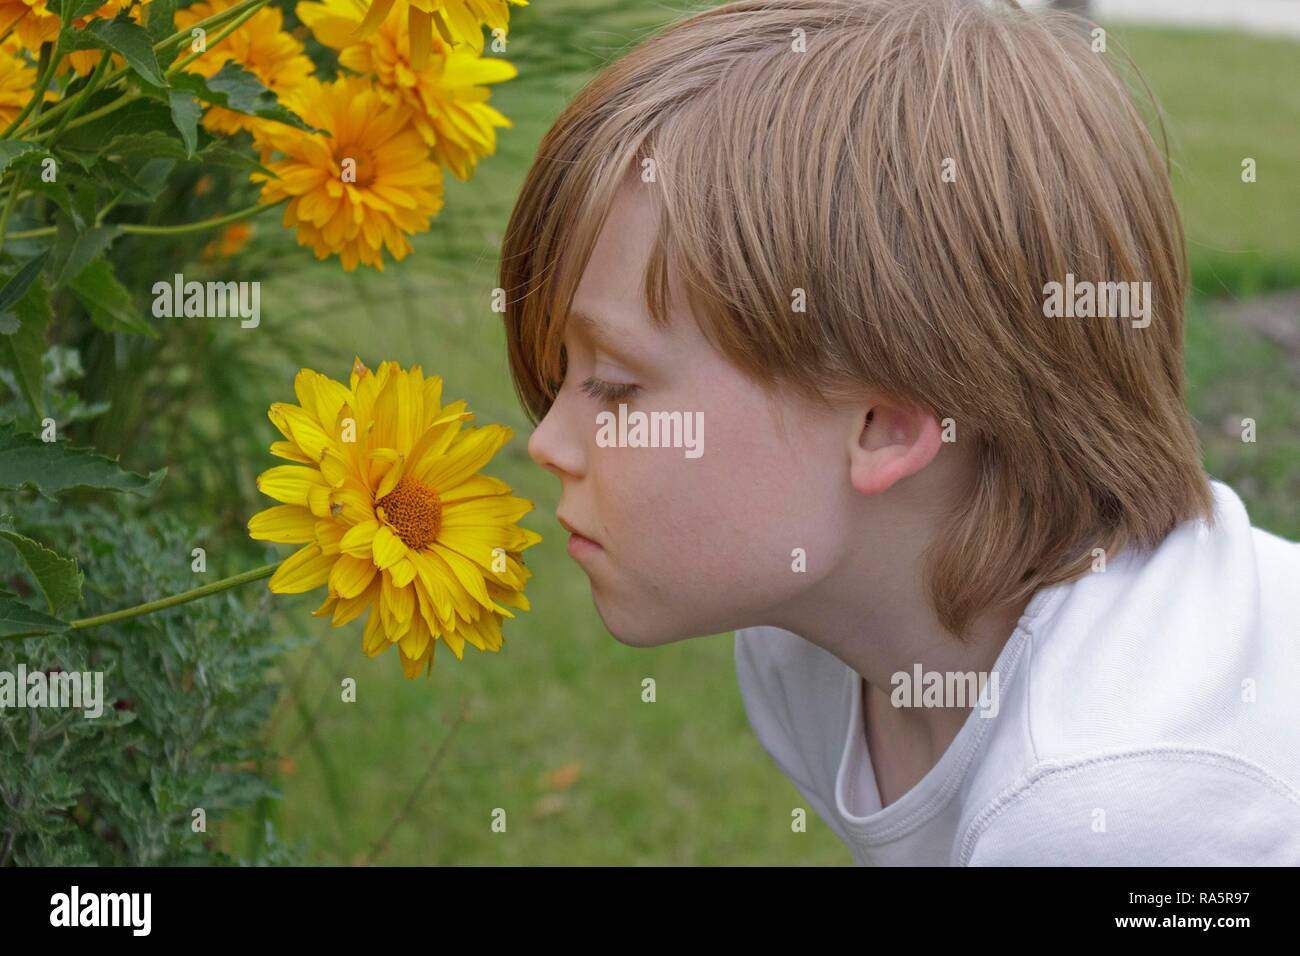 Boy smelling a yellow flower, Germany Stock Photo